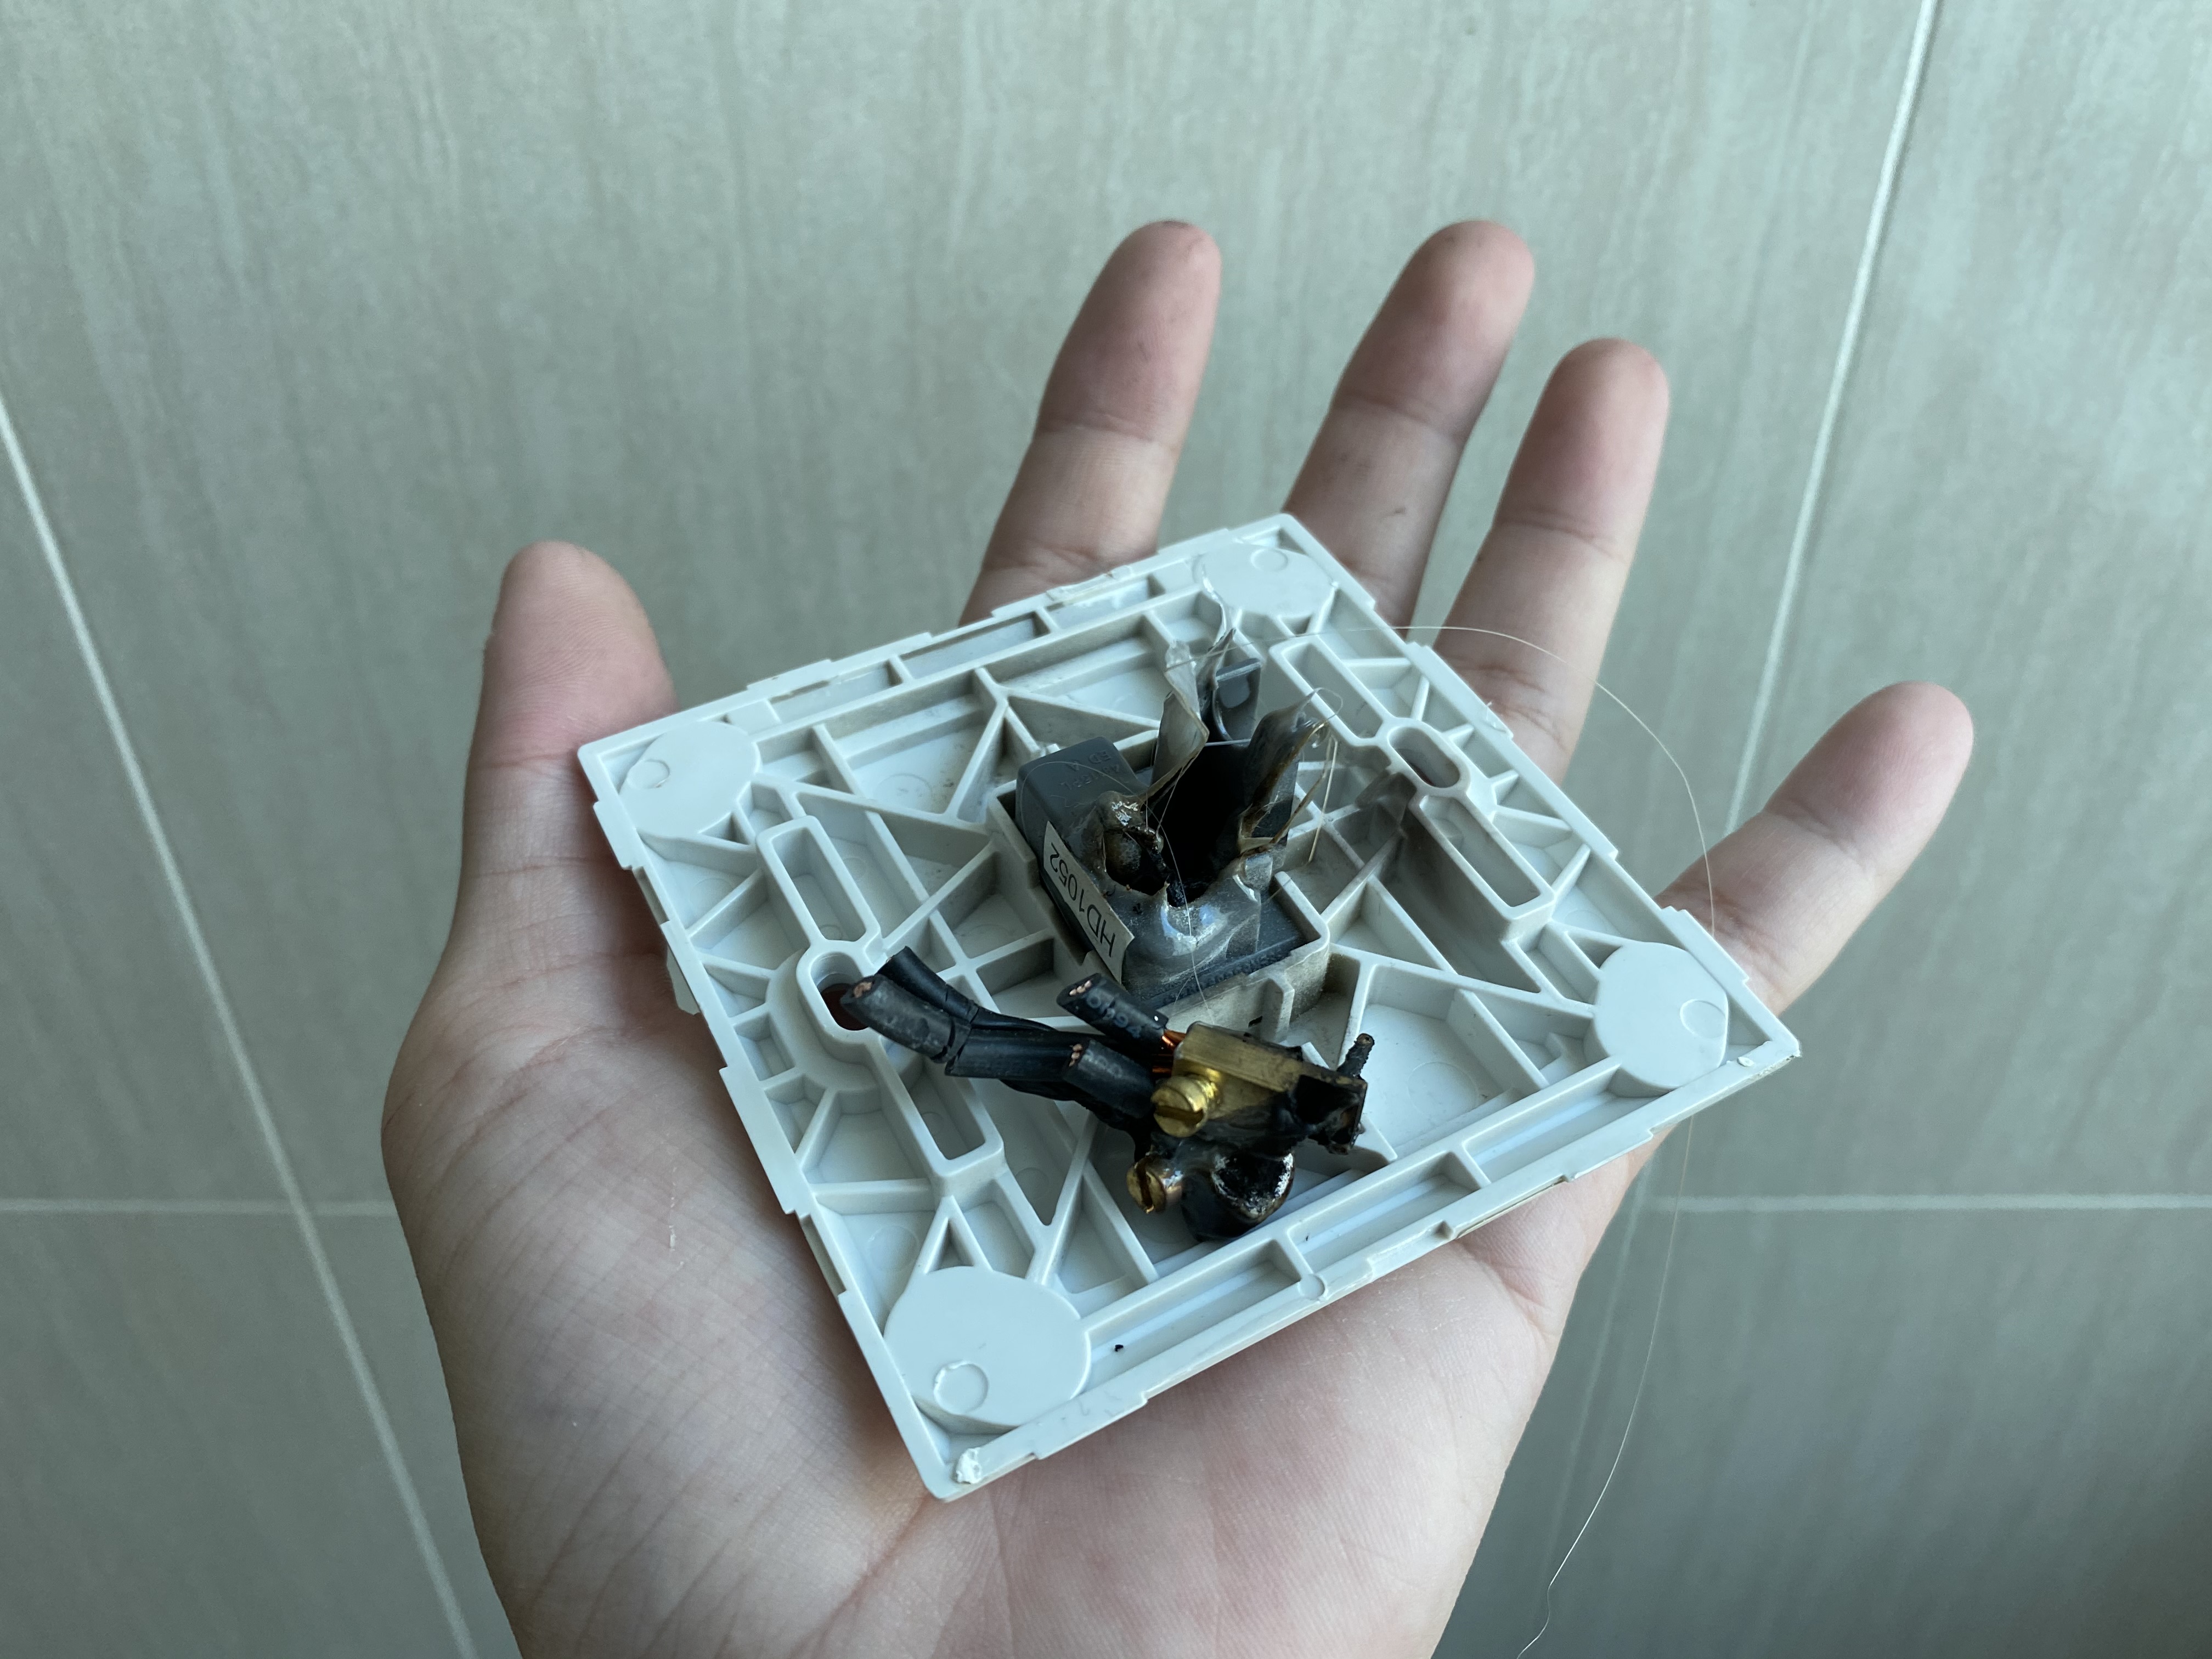 A switch with melted insulation and cables after it caught on fire